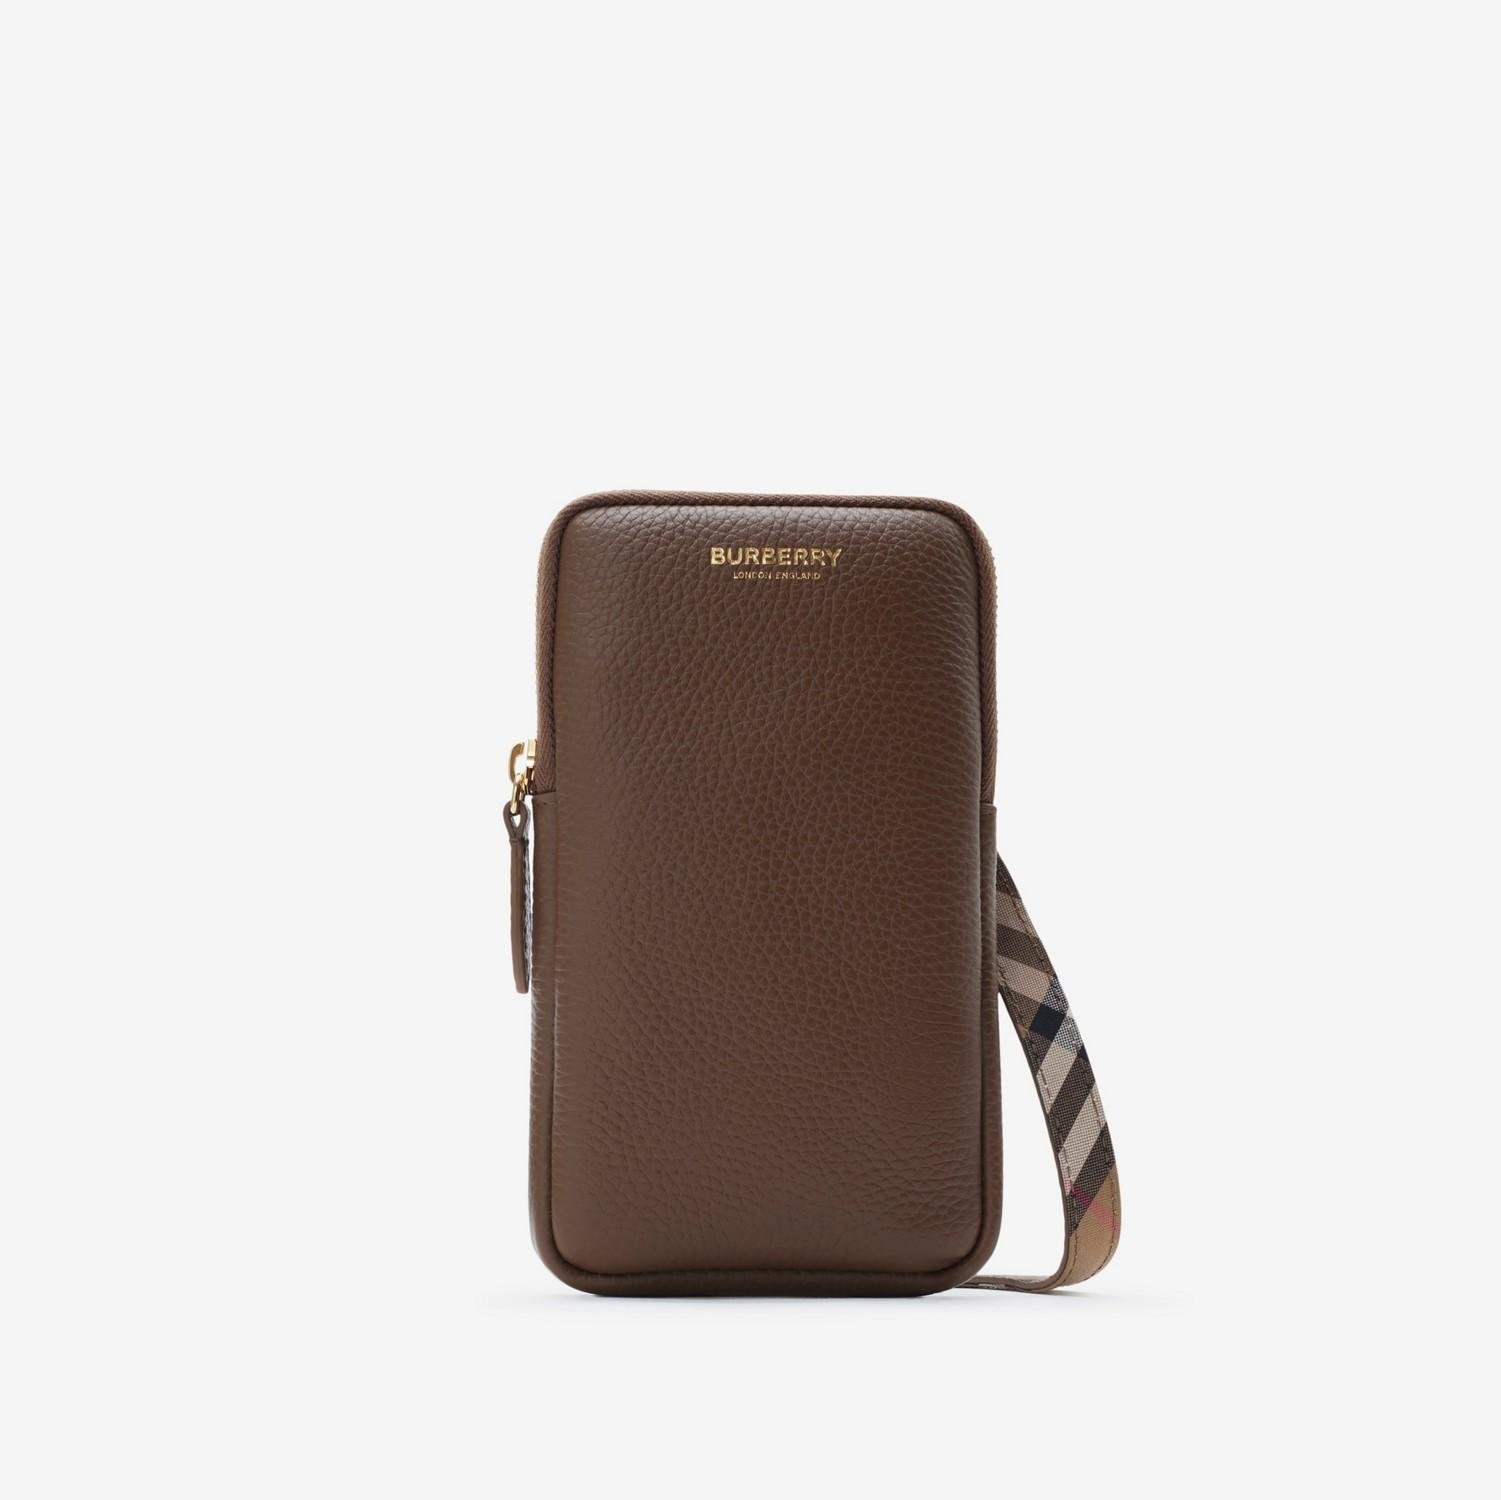 Phone Pouch by BURBERRY